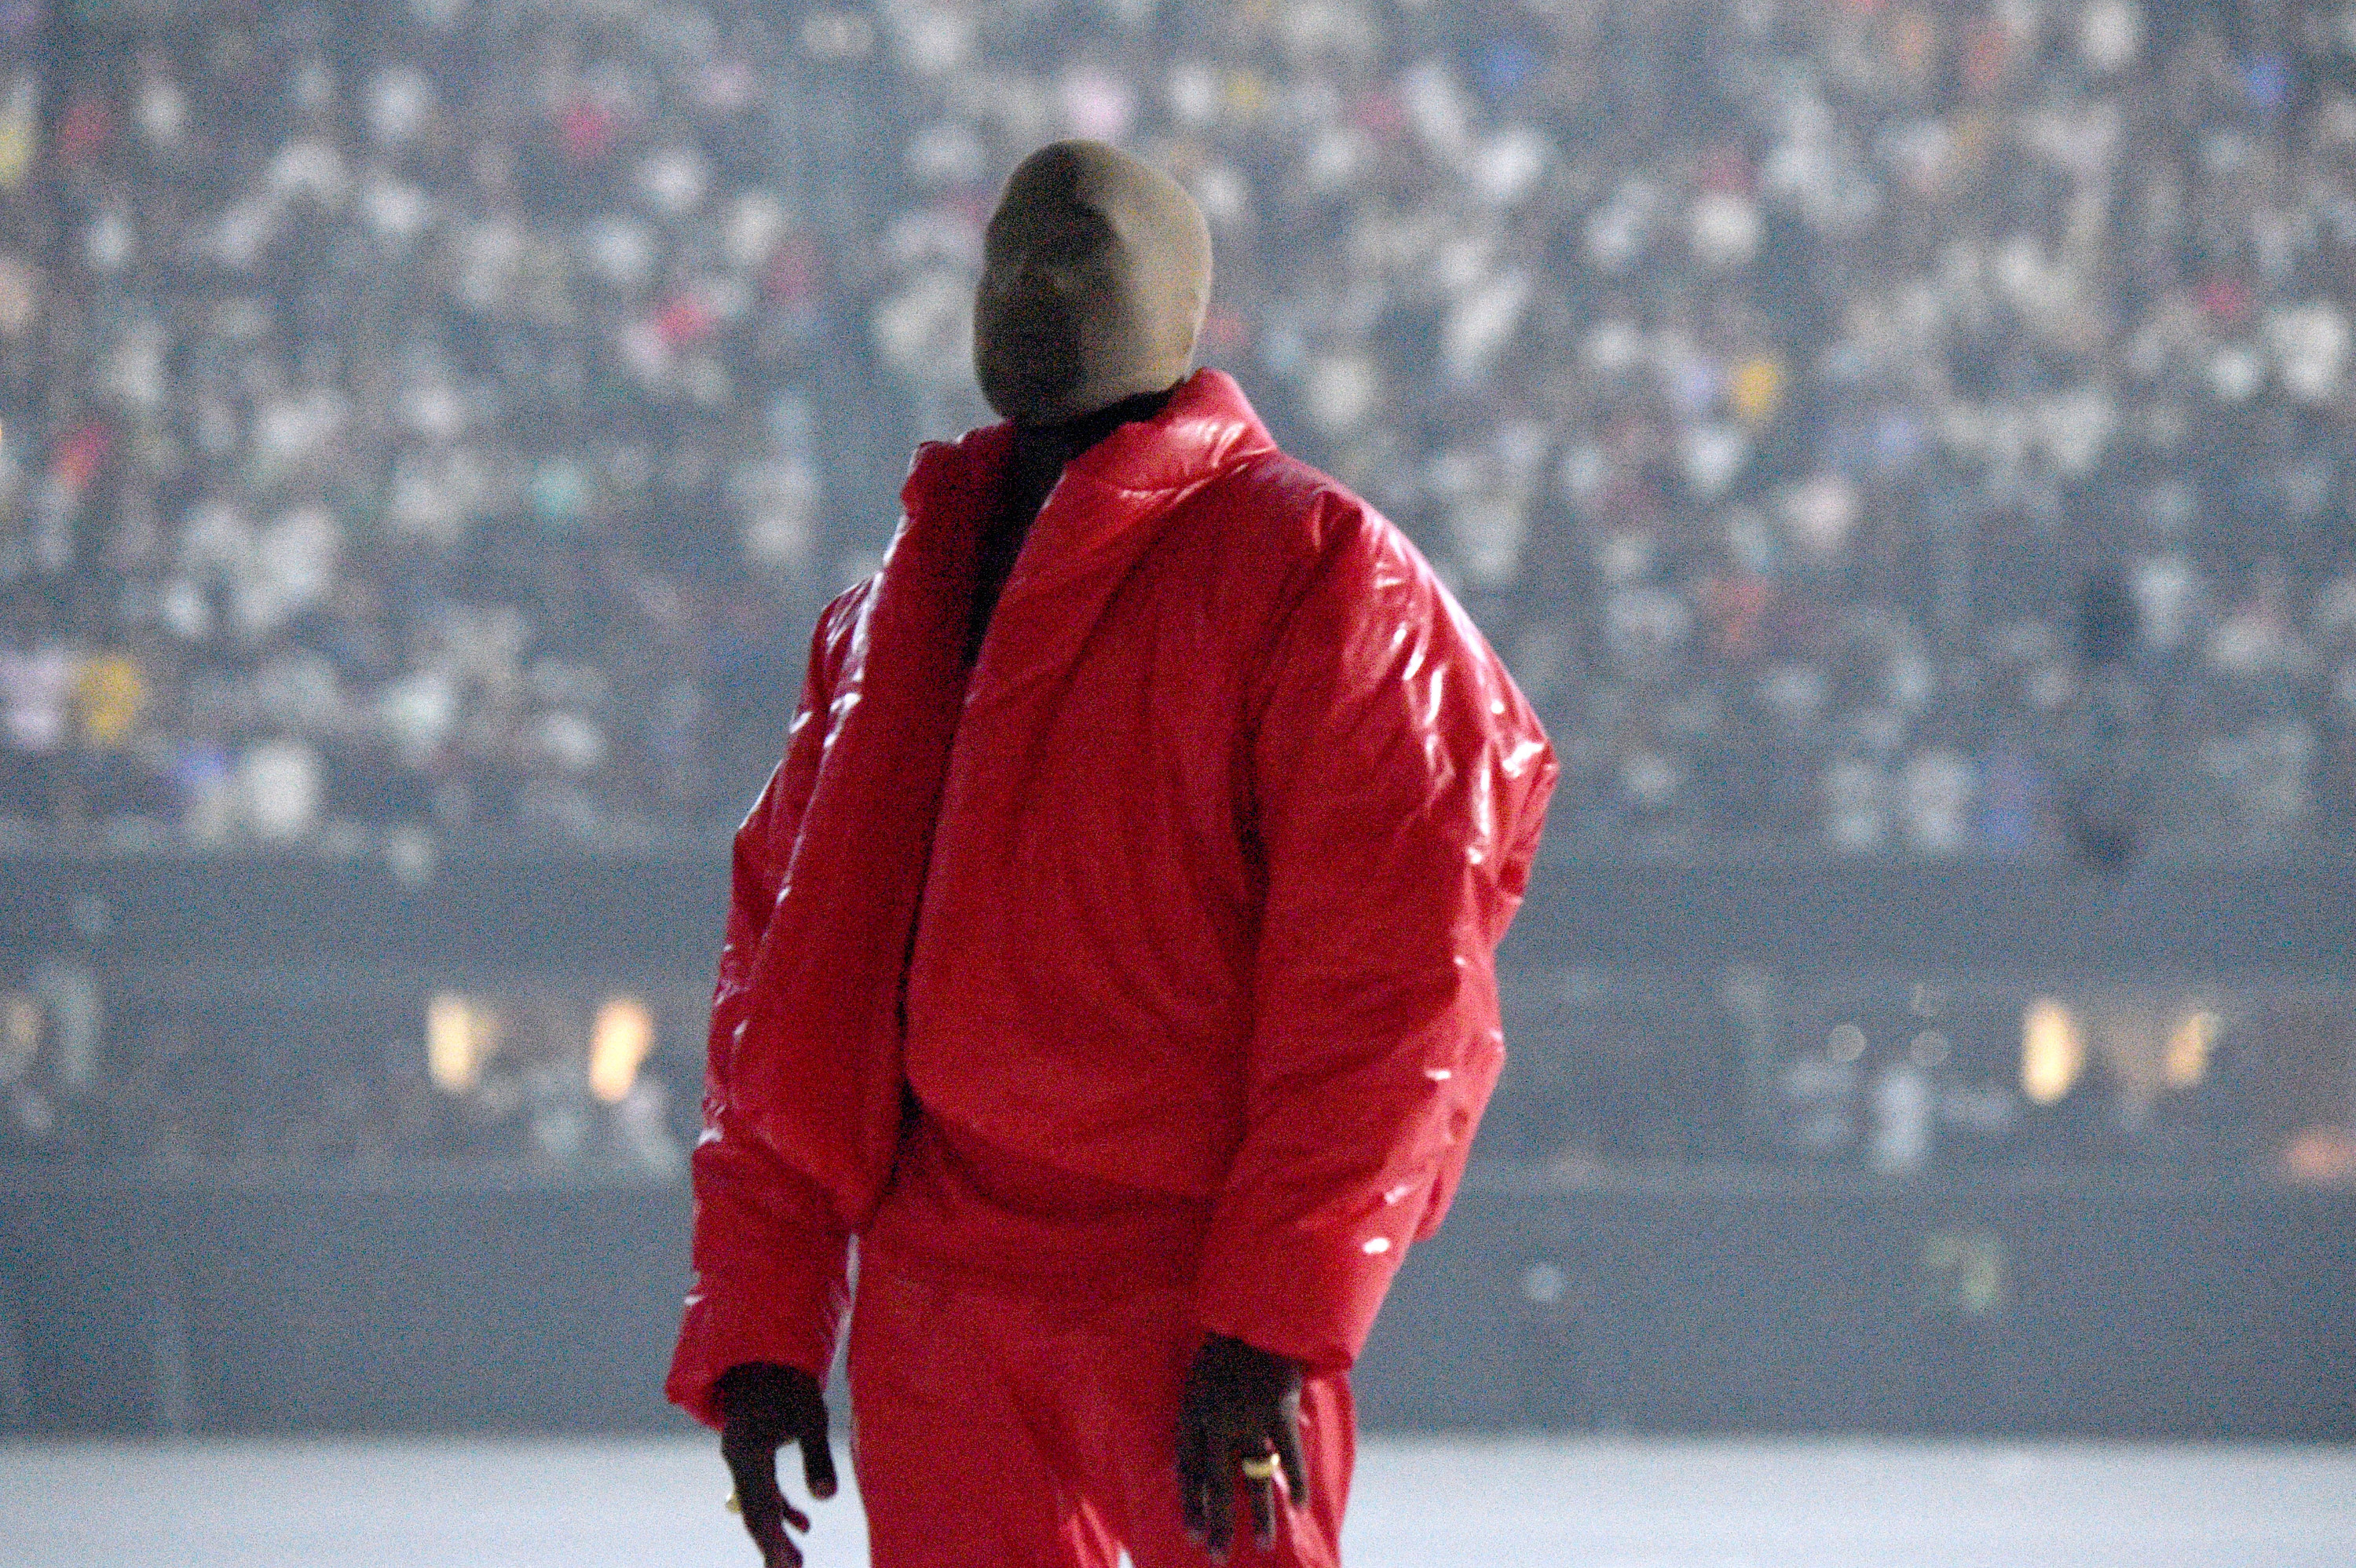 Kanye onstage in a puffer jacket and his face and head fully covered